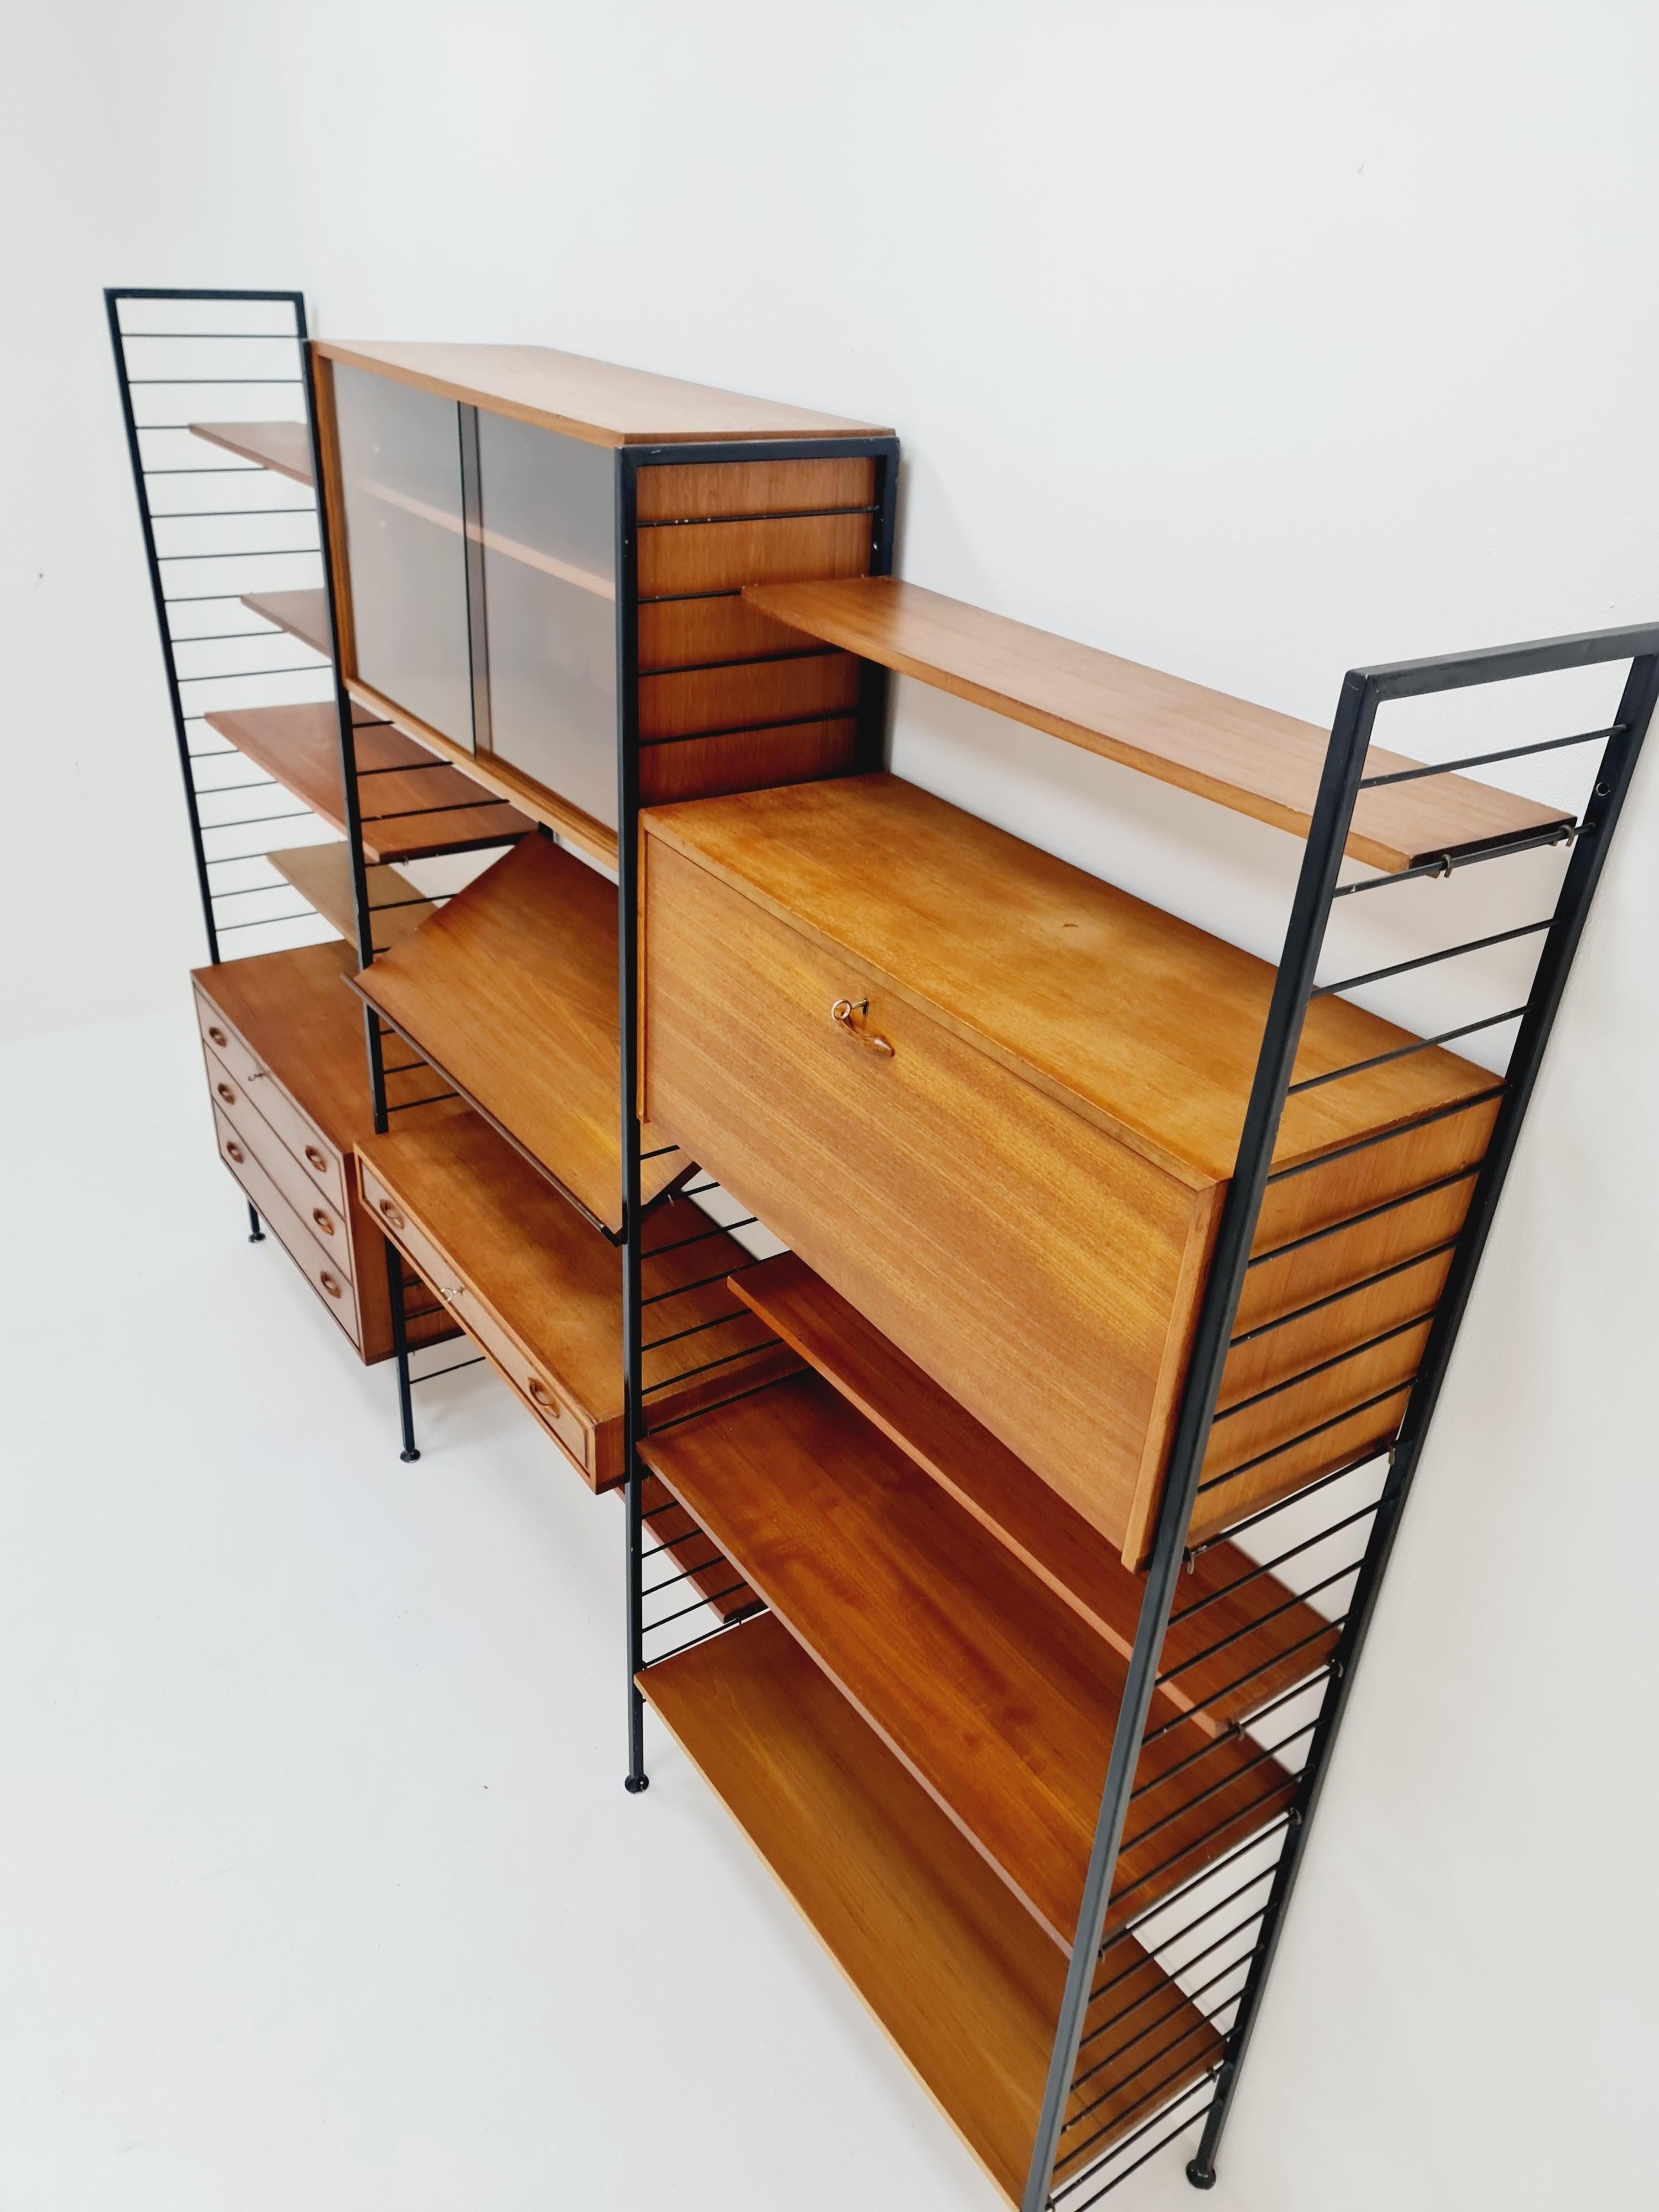 Free standing Mid century modular unit shelving system by Staples Ladderax 5